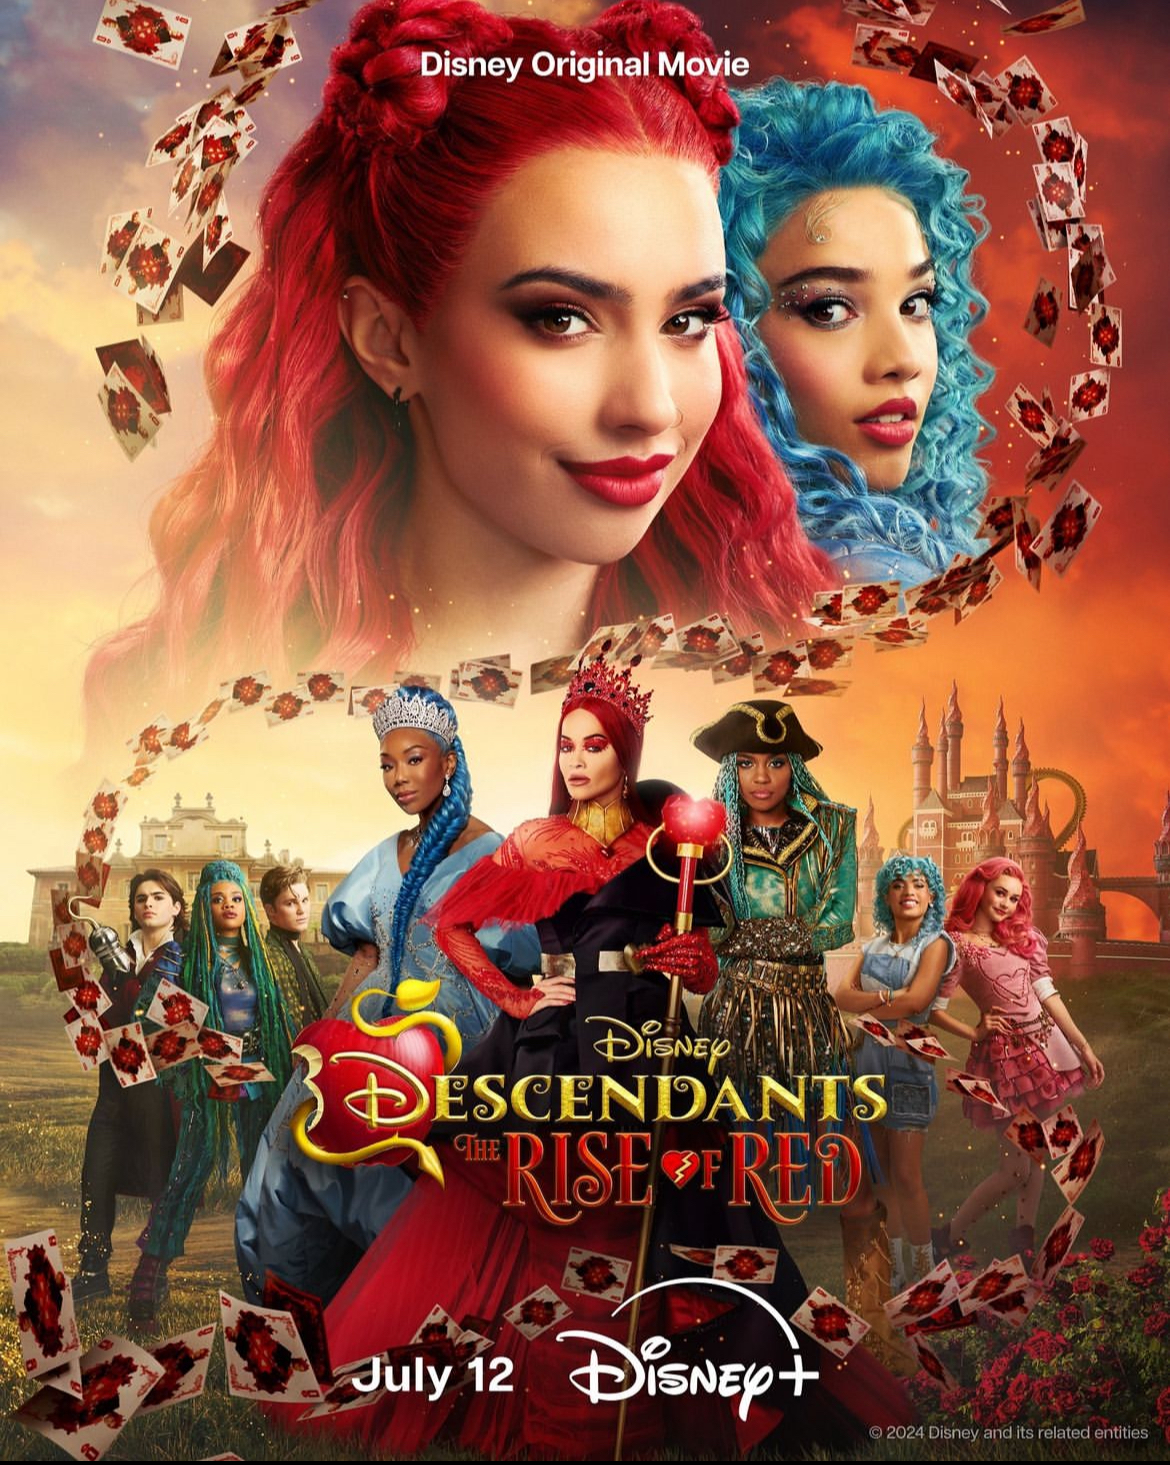 Rise Of Red The Sescendents New Movoe By Disney

